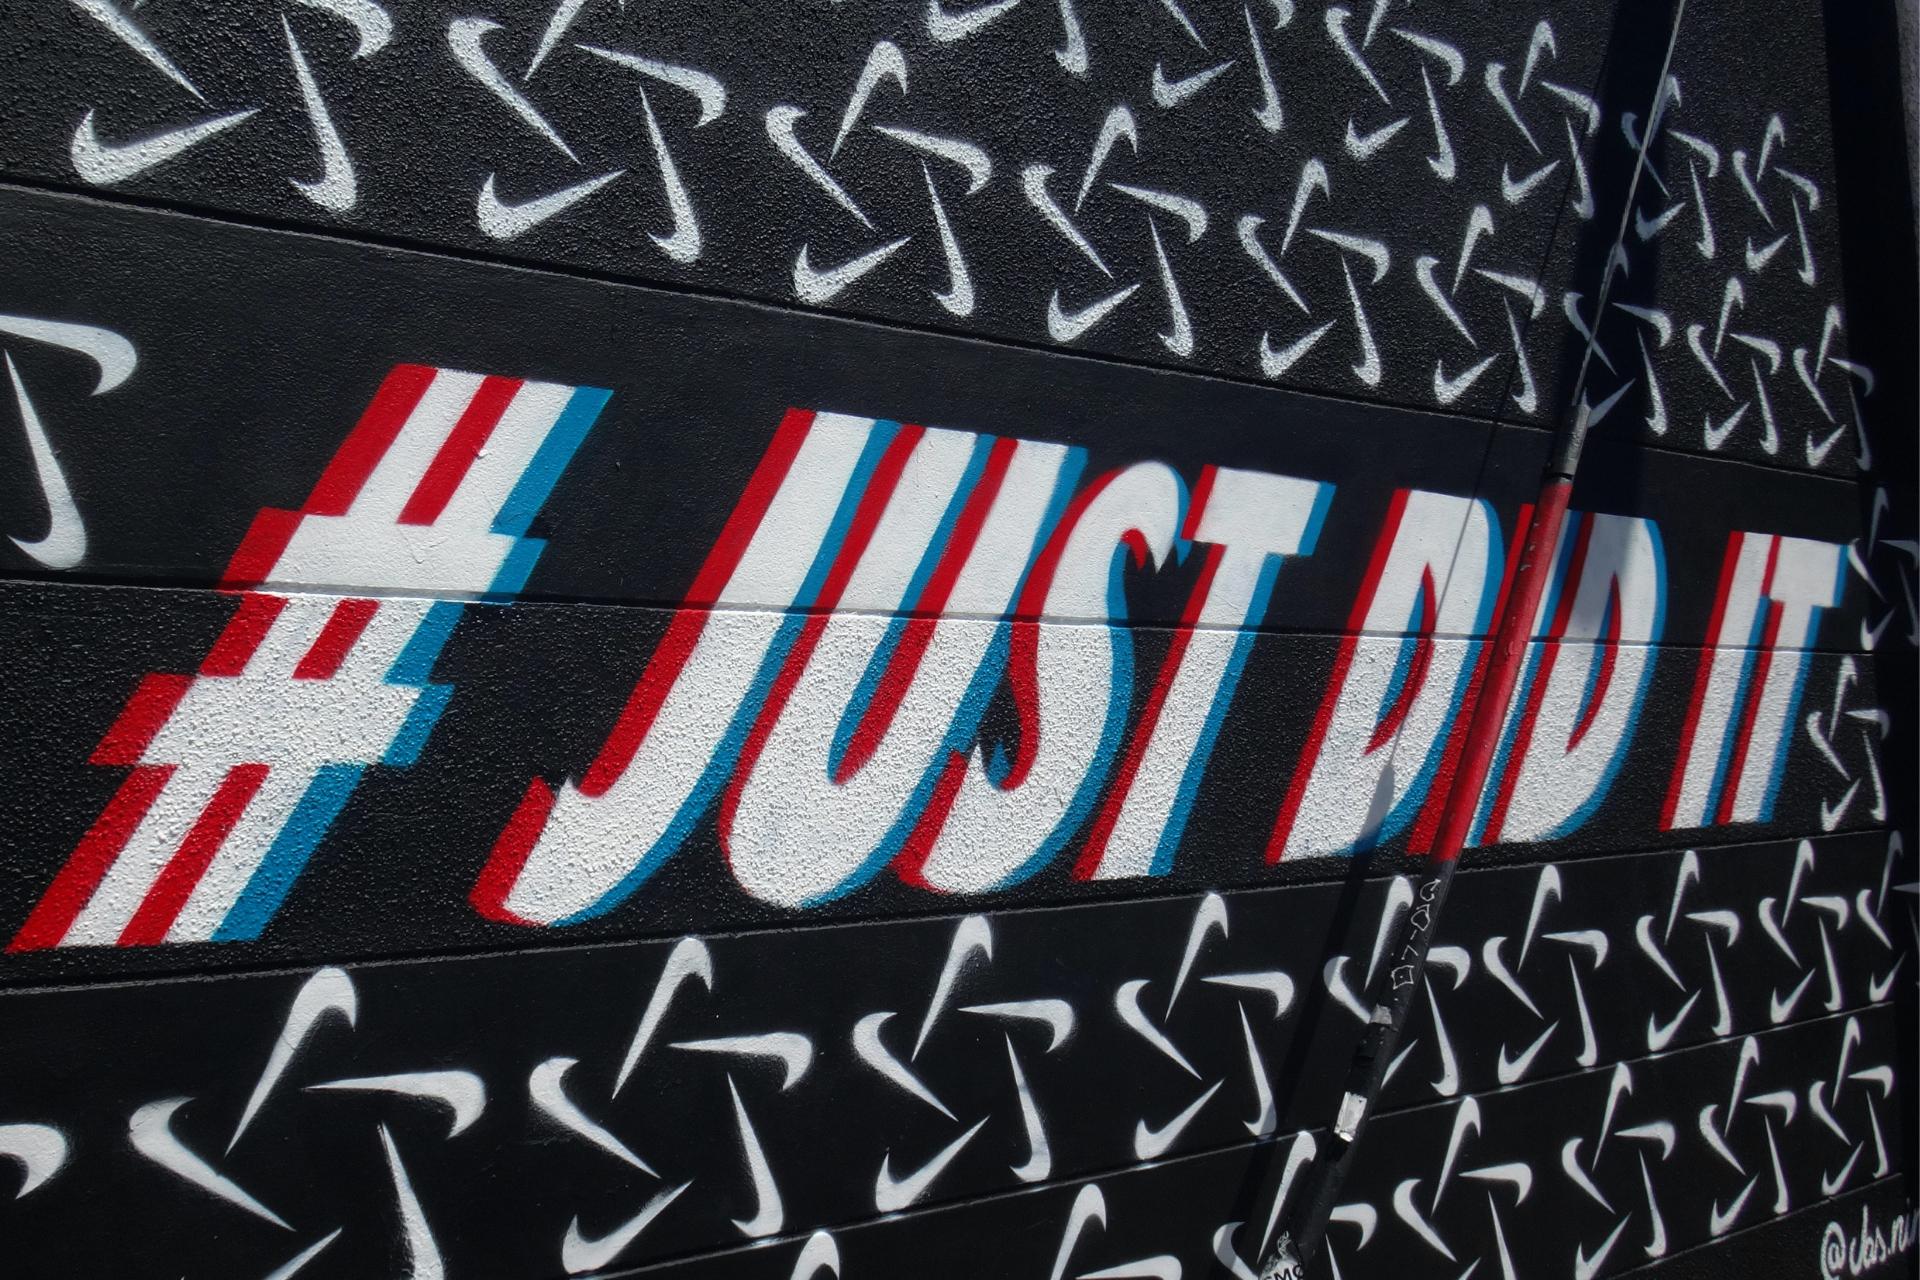 Graffiti with a copycat of Nike's slogan just do it, but instead it's just did it